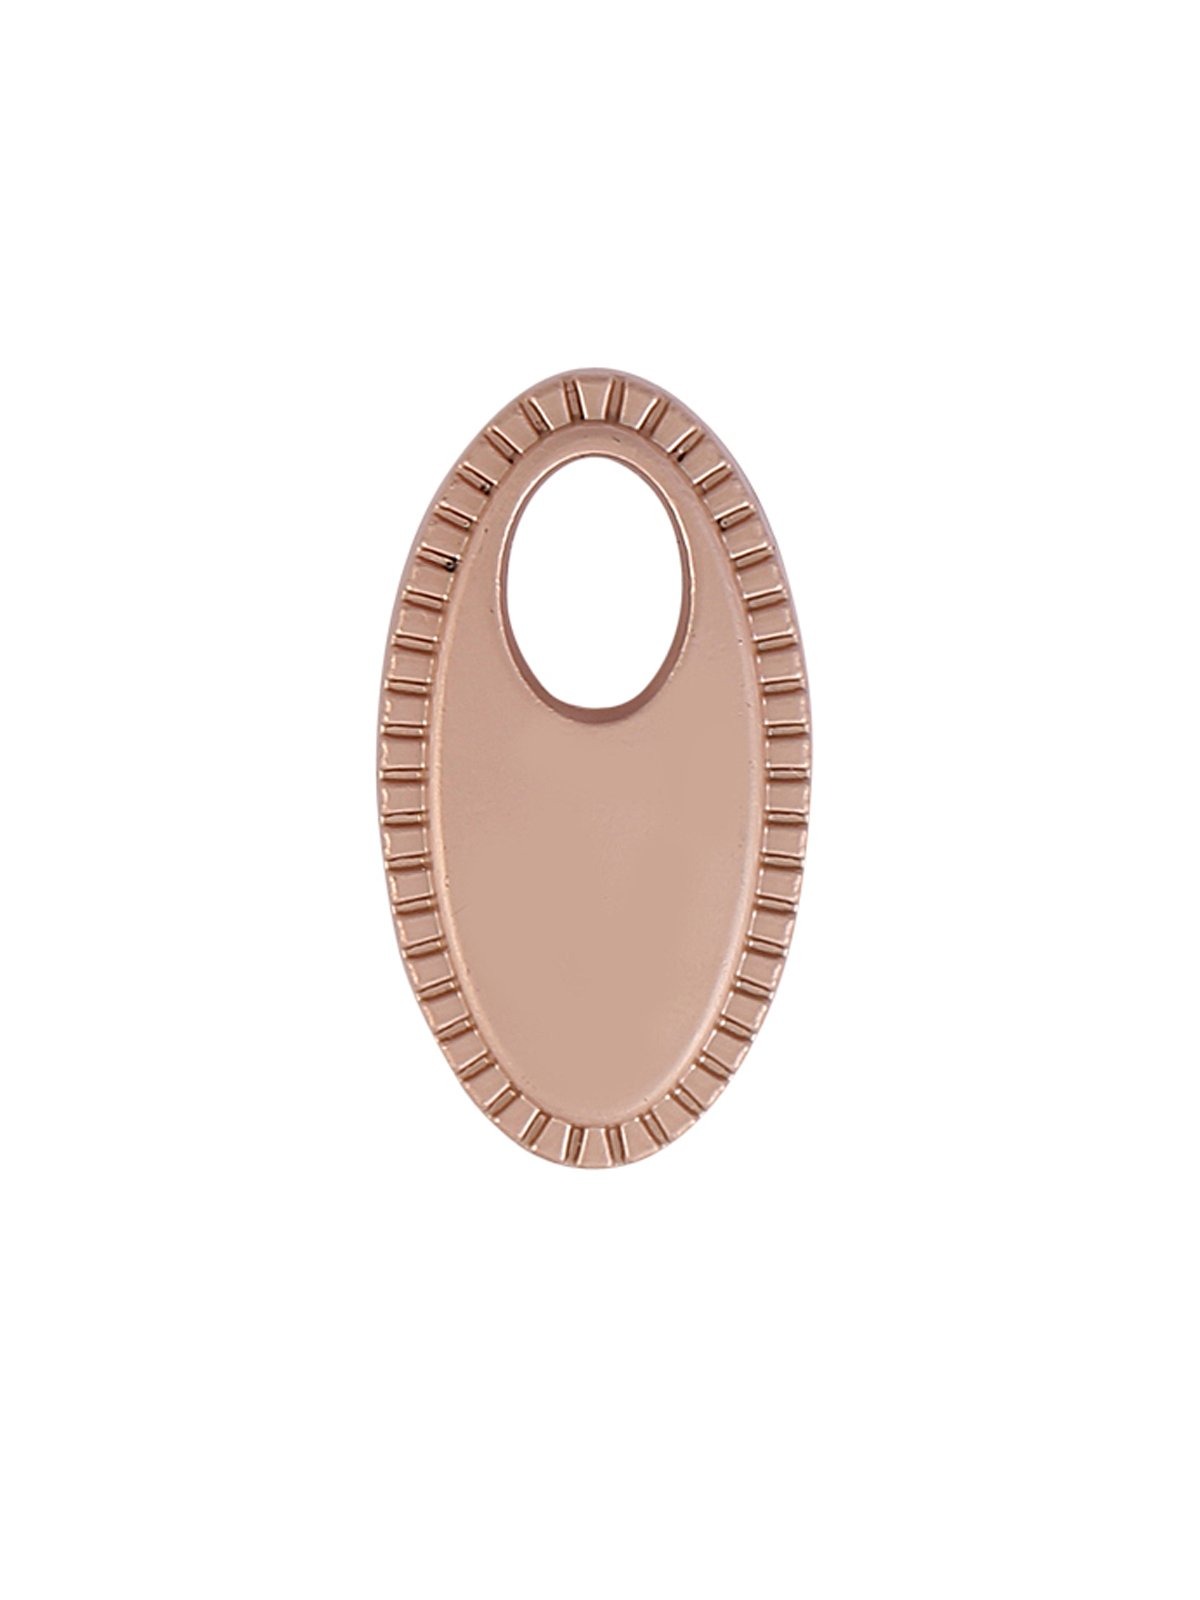 Exquisite Matte Finish Oval Shape Fancy Metal Button in Mette Gold Color 